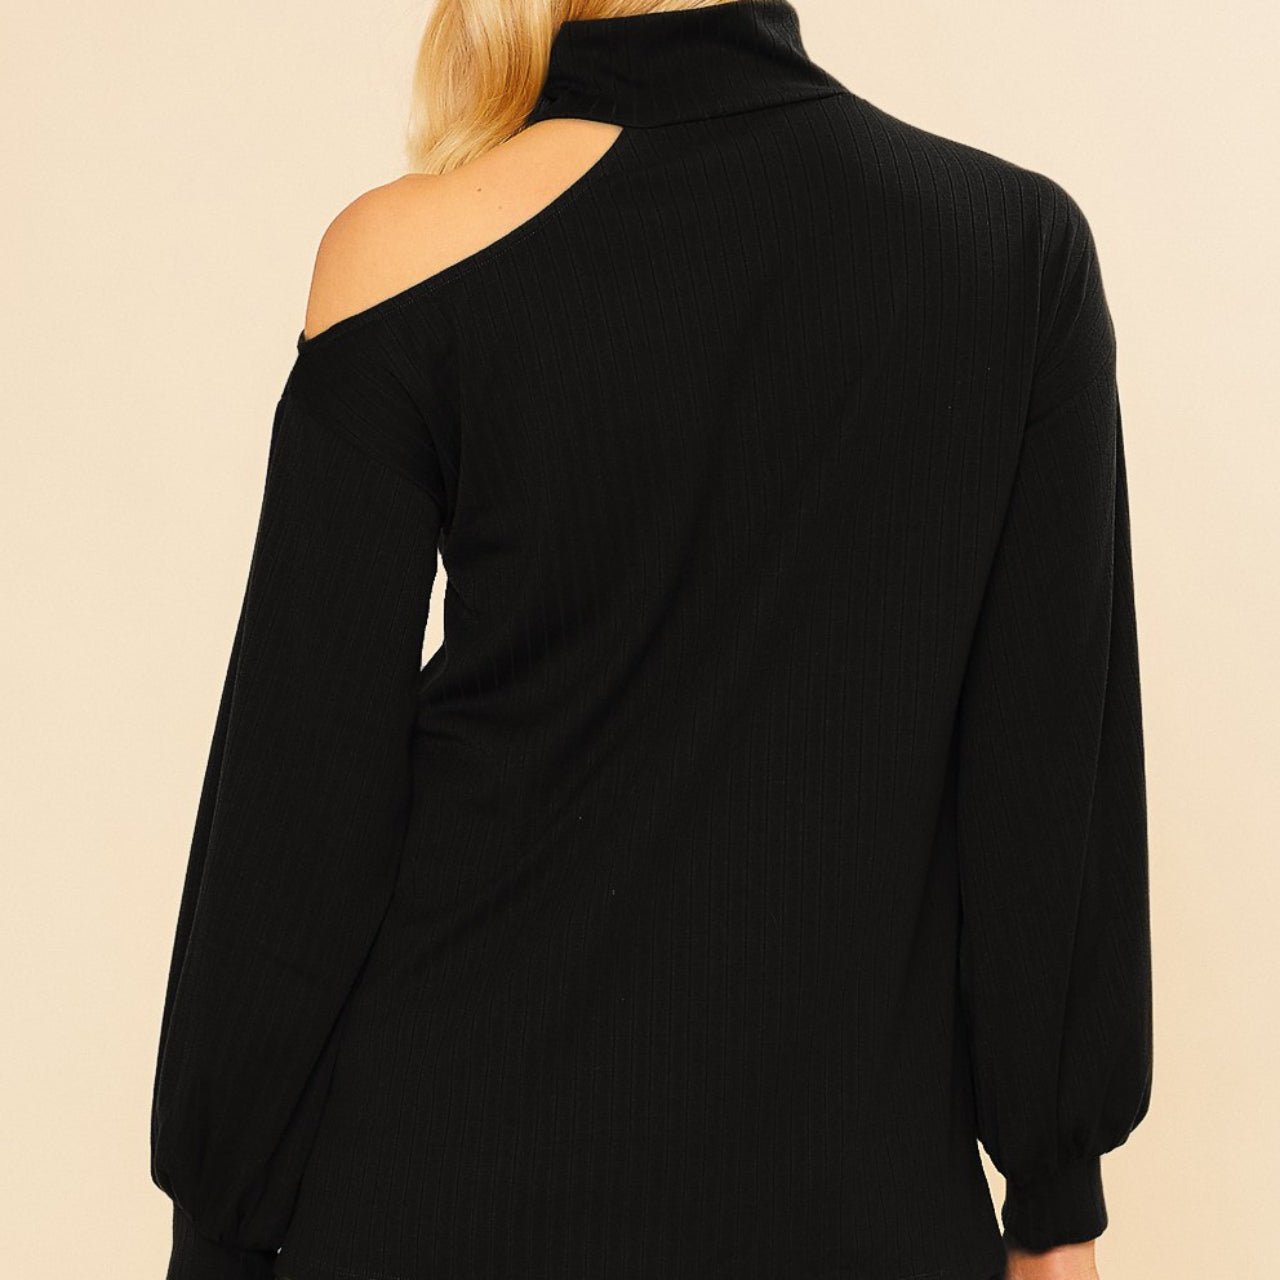 Keely Mock Neck Wide Ribbed With One Open Shoulder Black Top - The Graphic Tee